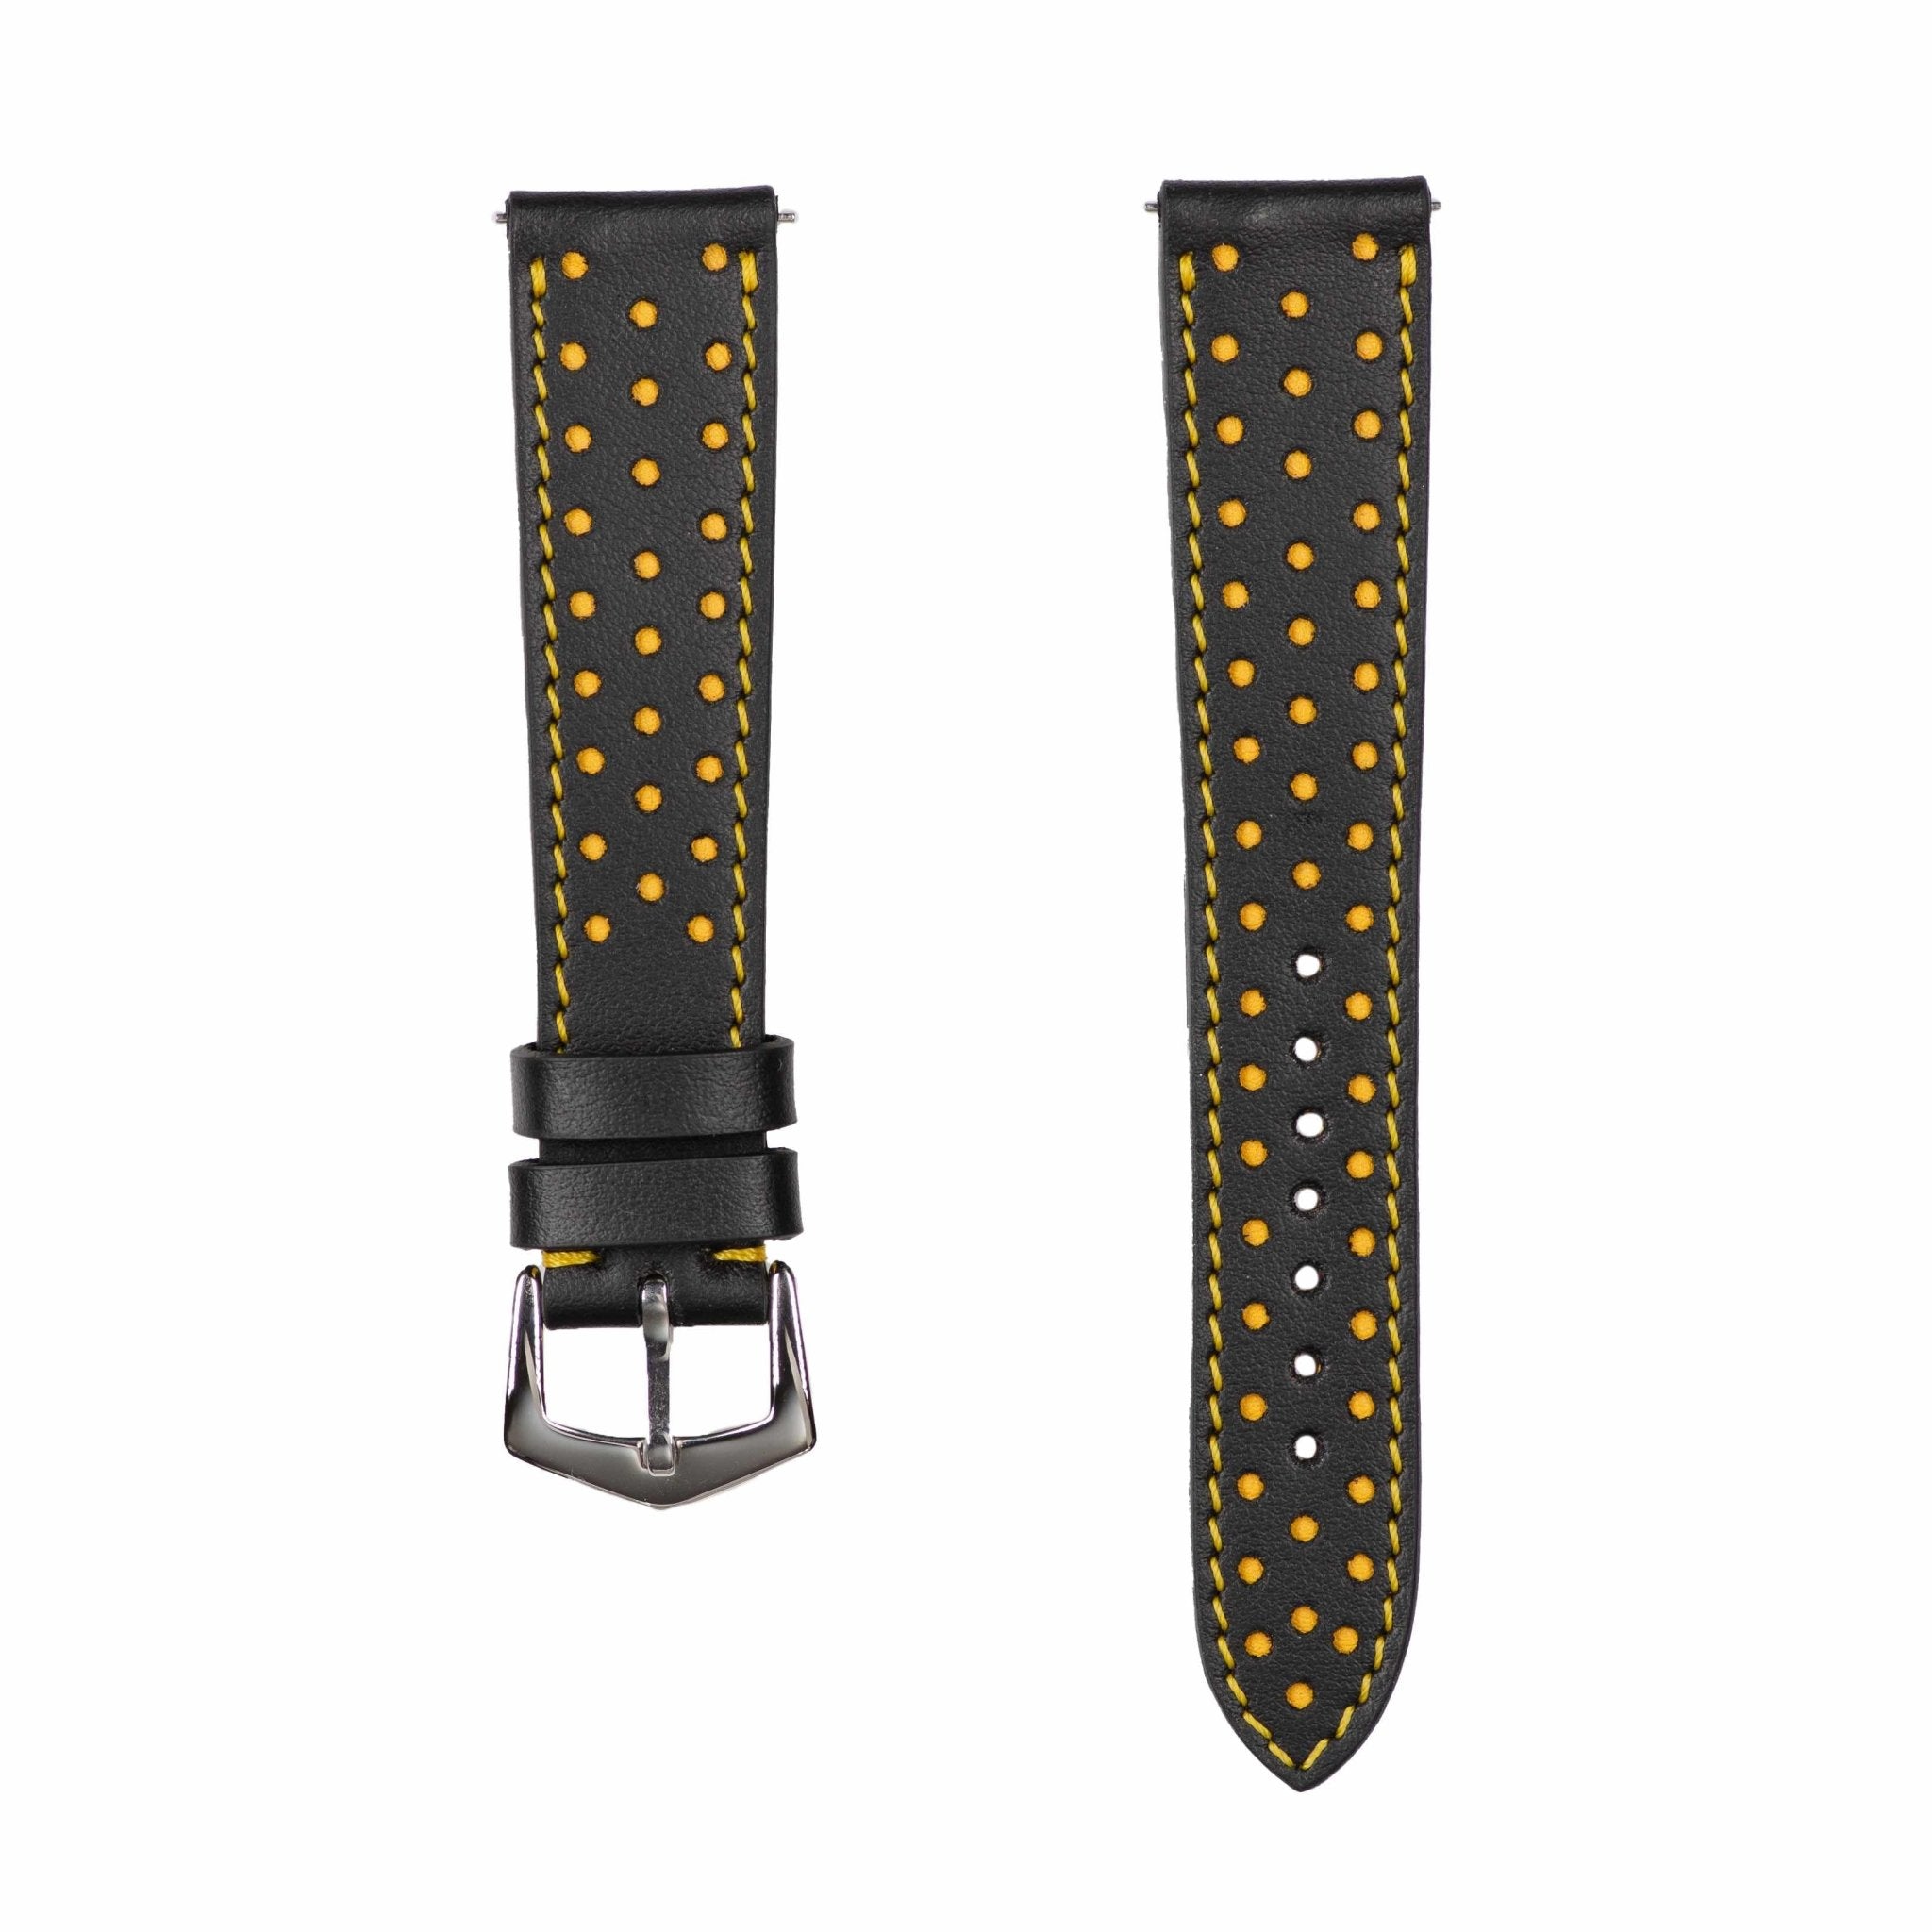 Black & Yellow "Driver" Leather Watch Strap